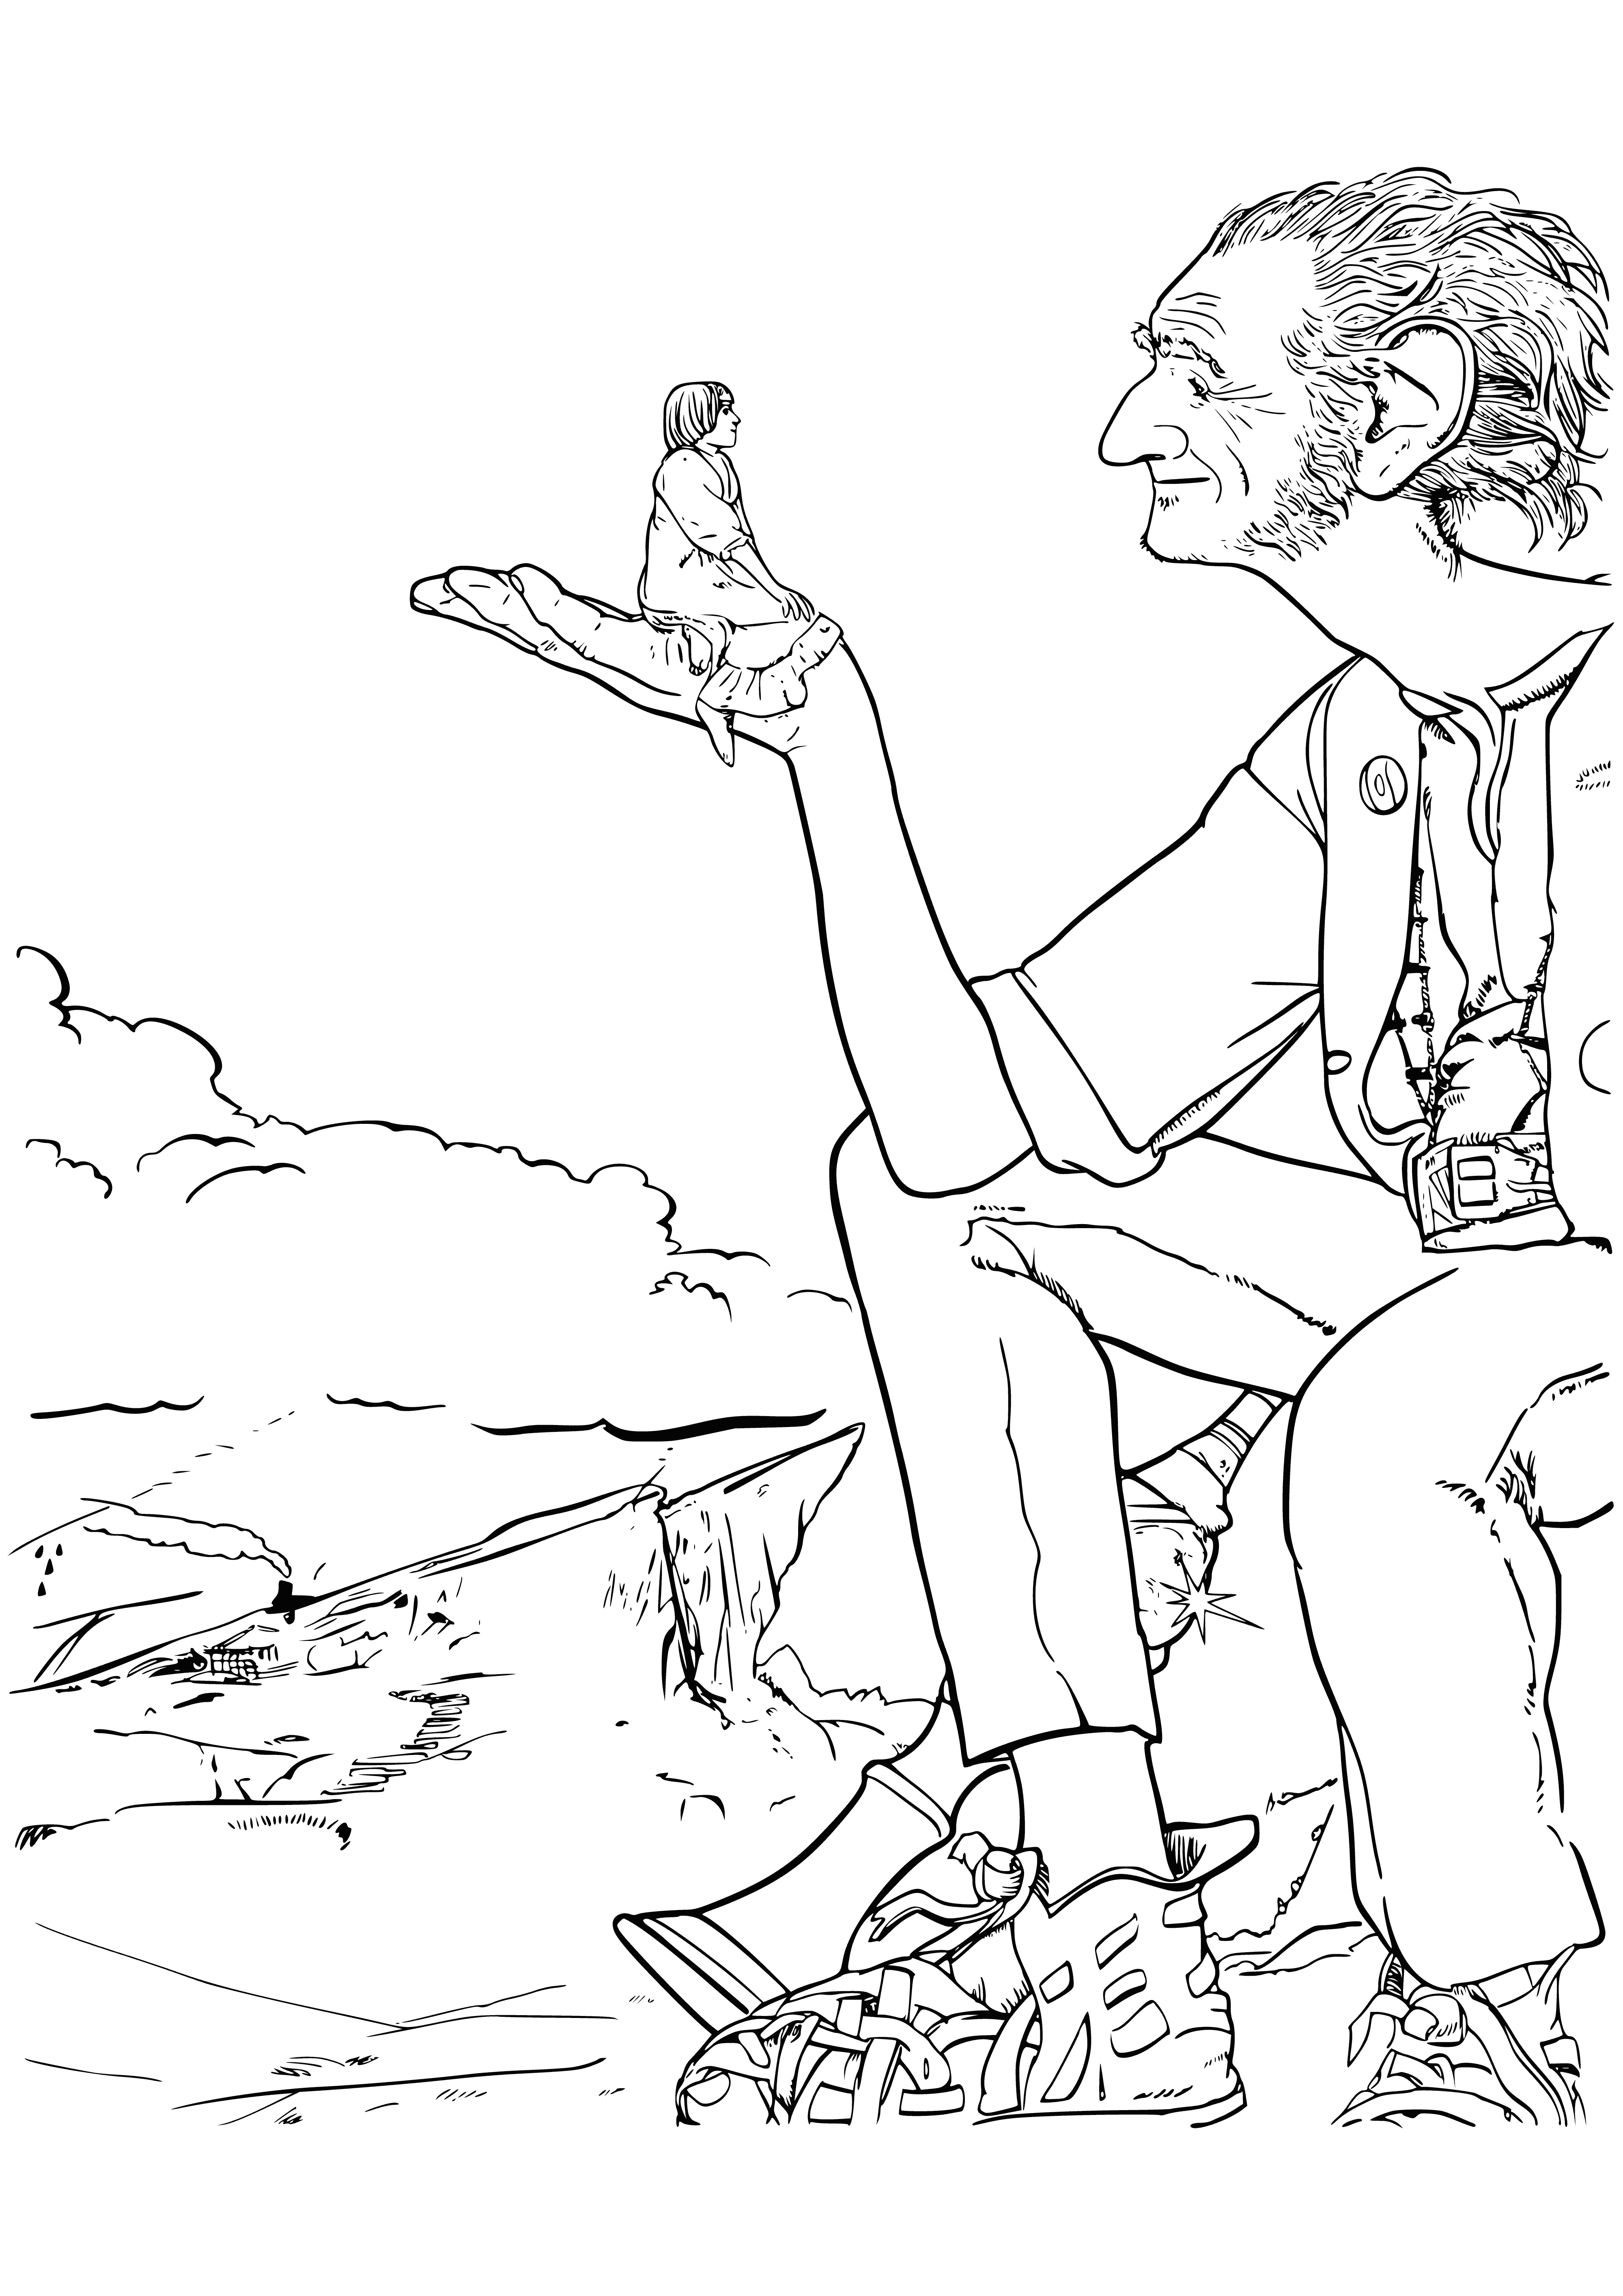 The giant BDV and the girl Sophie coloring page